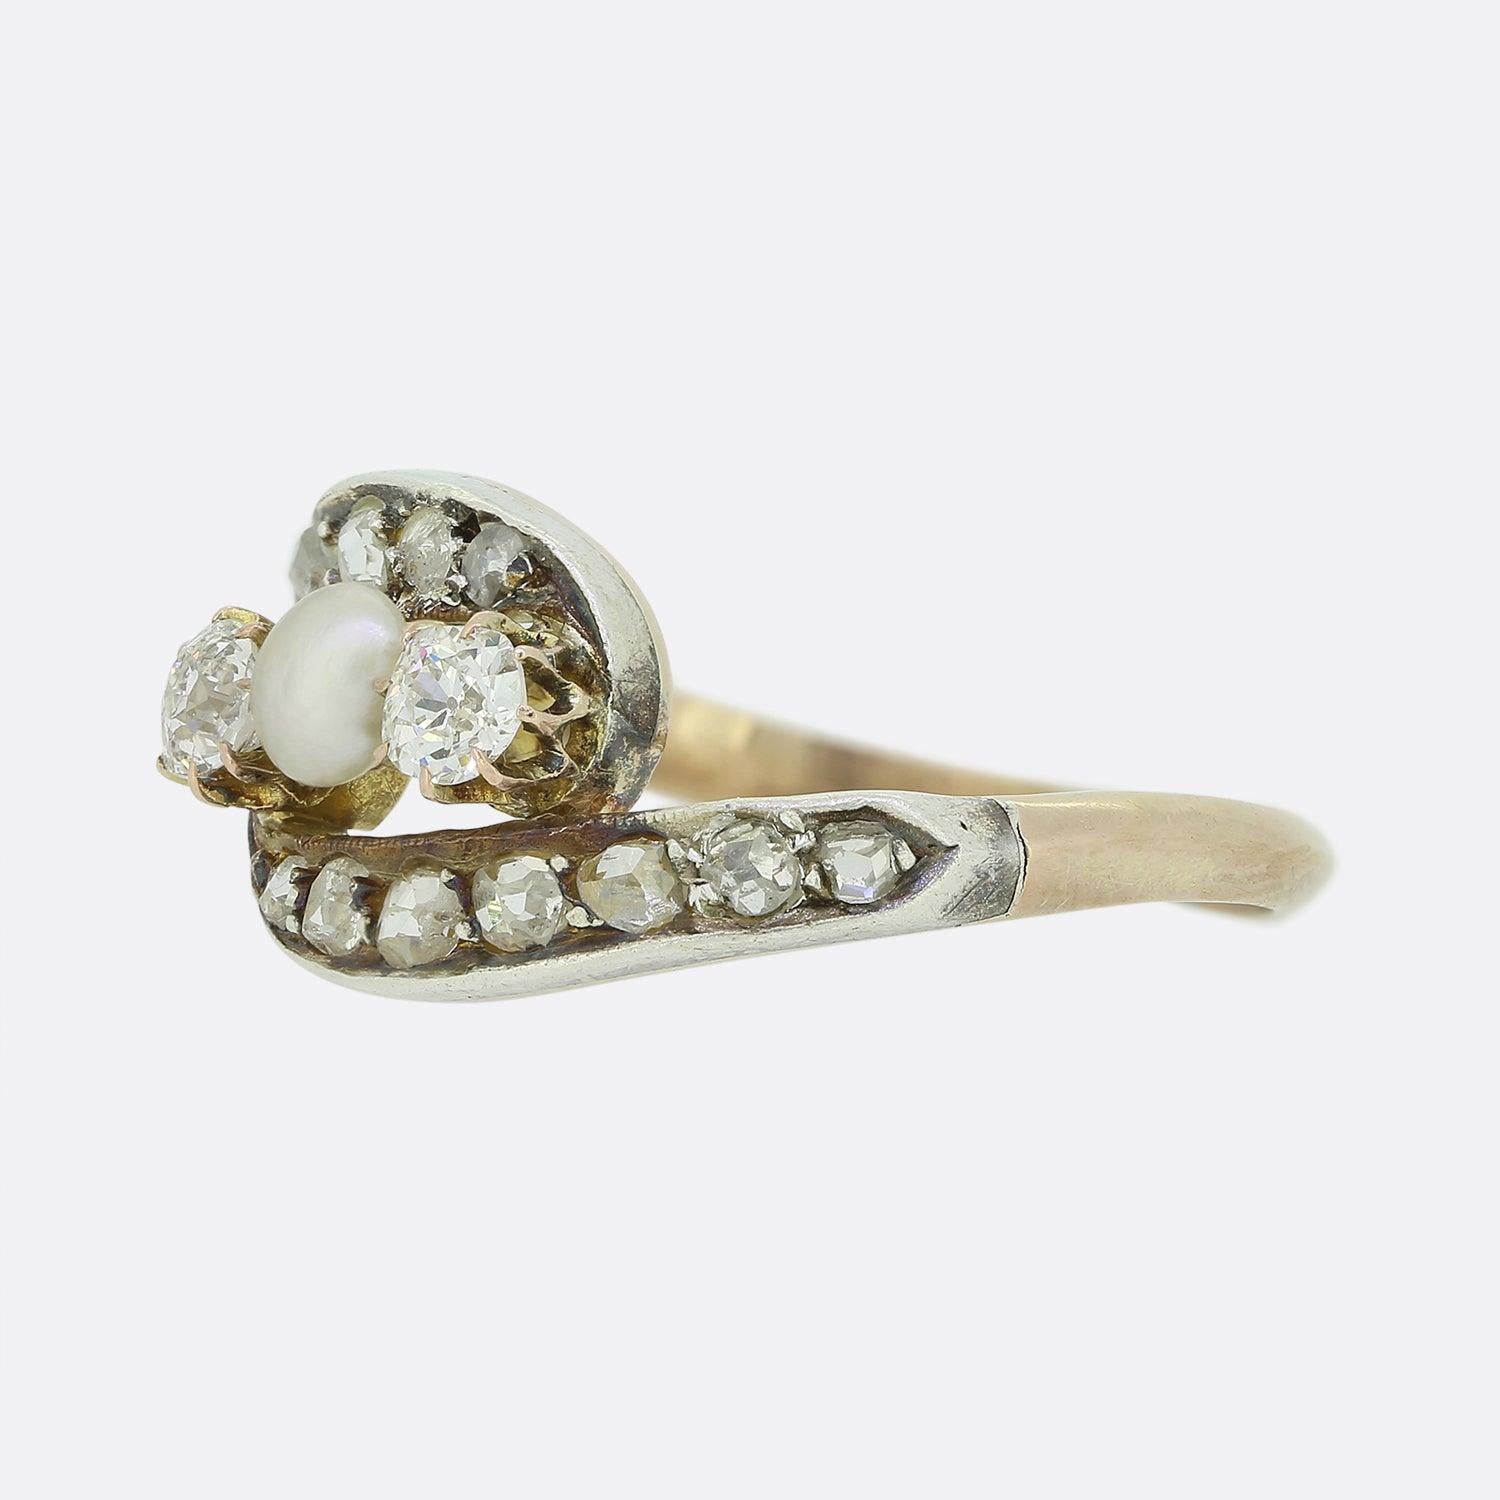 Here we have a delightful pearl and diamond crossover ring from the Victorian era. The swirling face of the ring showcases two old cut diamonds and a natural pearl in the centre, with a backdrop of claw set rose cut diamonds leading down to either